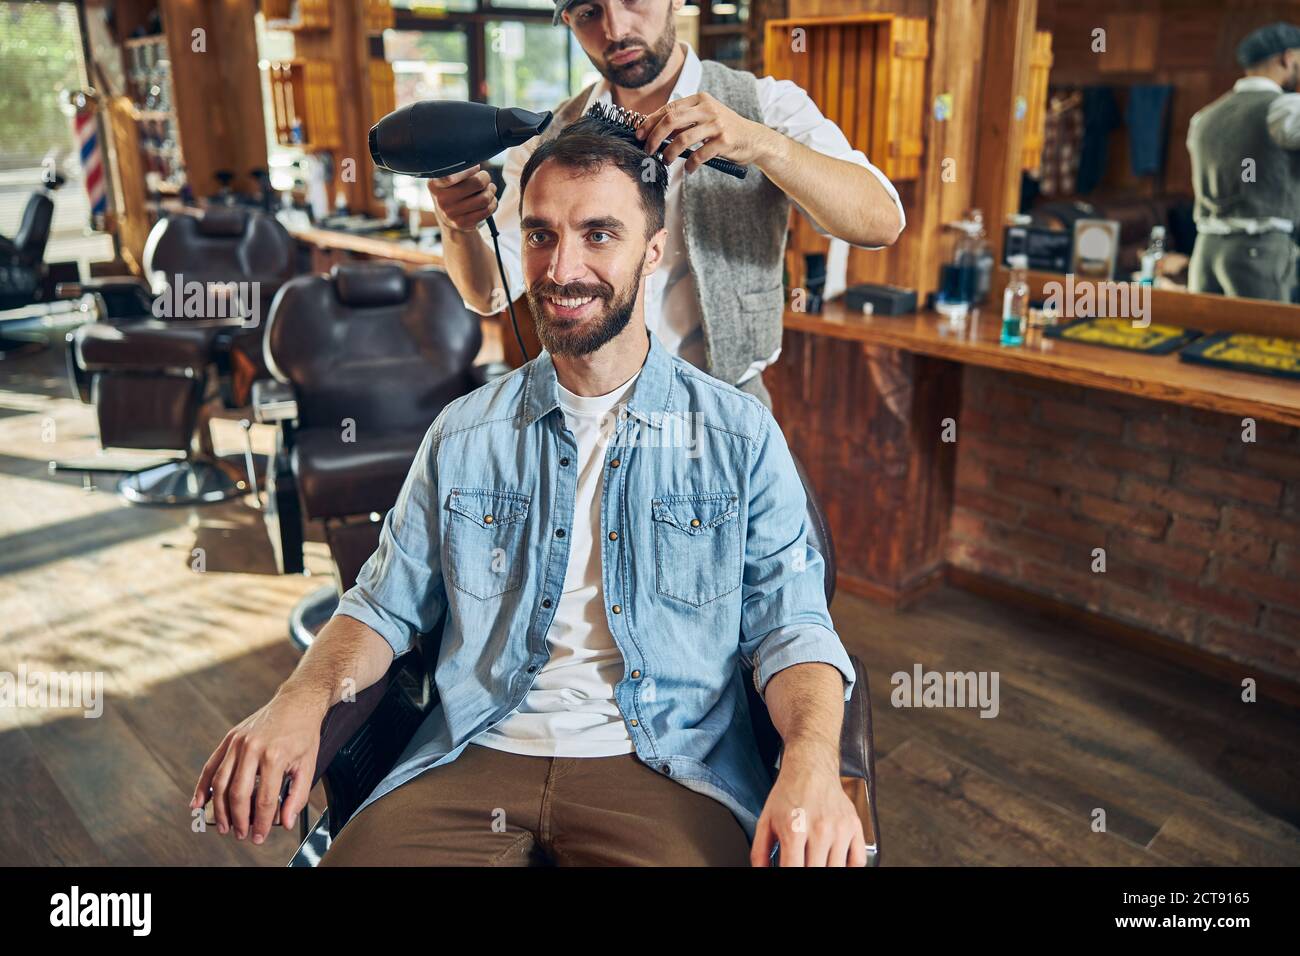 Cheerful client of a barbershop having his hair blow-dried Stock Photo